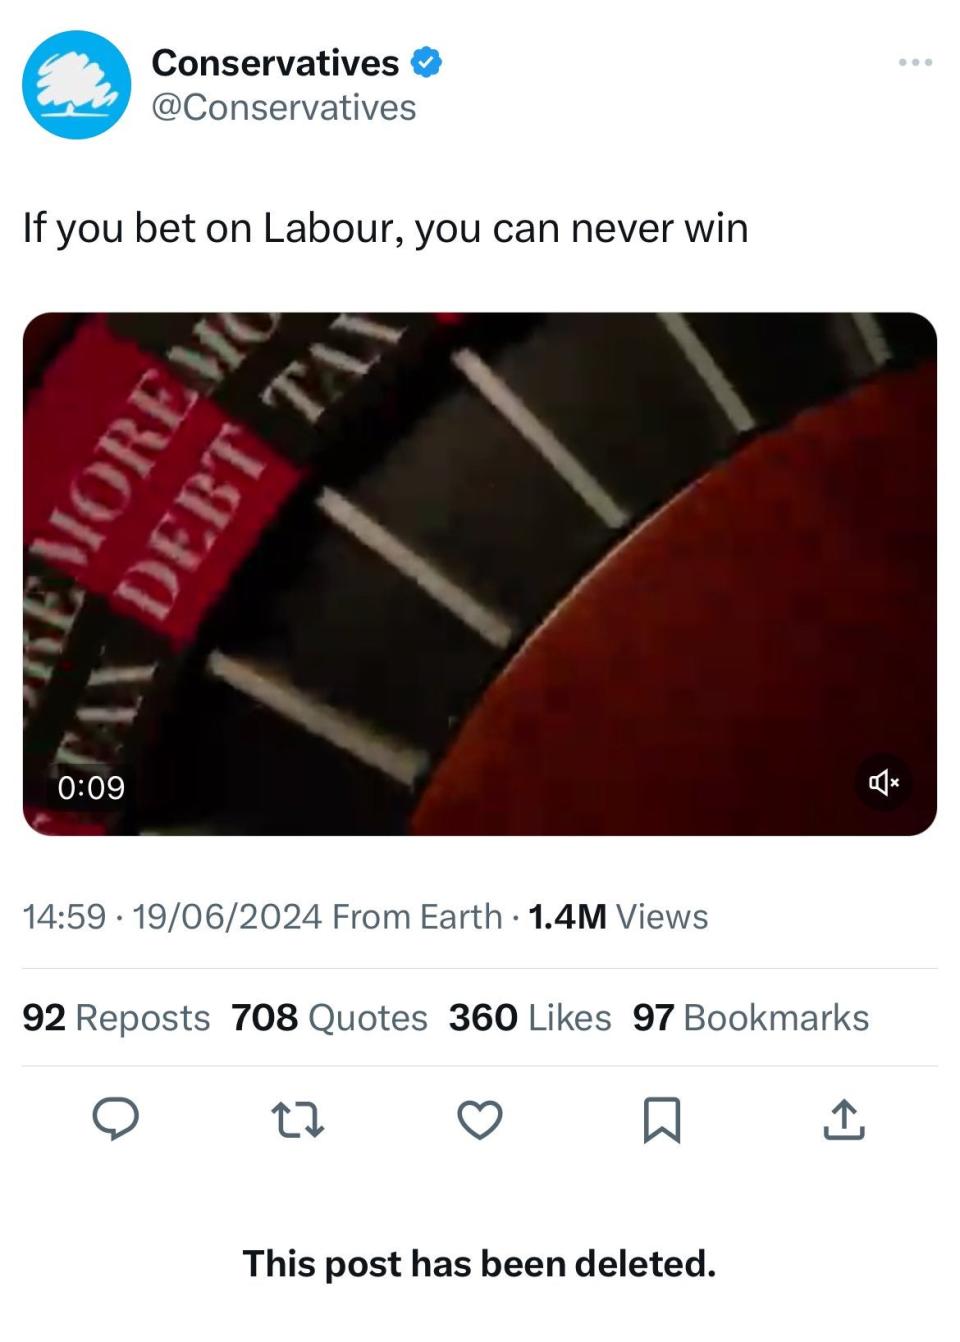 The Conservatives have deleted a tweet after it was revealed two candidates are being looked into over a betting allegation (Twitter)